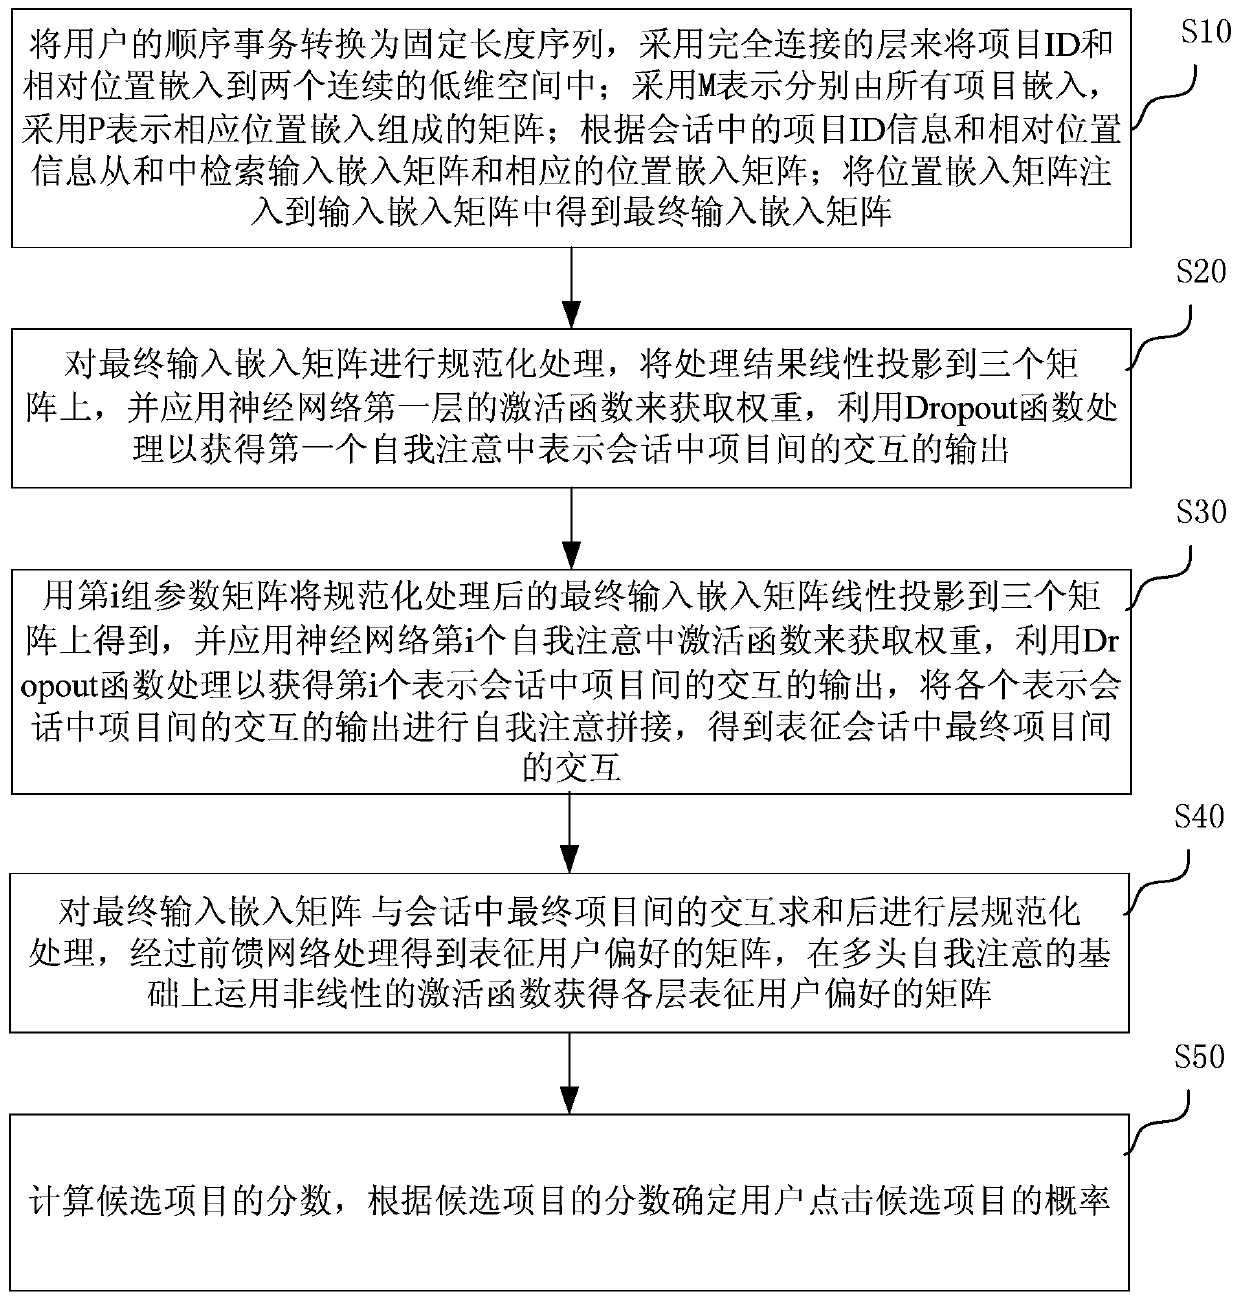 Self-attention network information processing method for streaming media recommendation